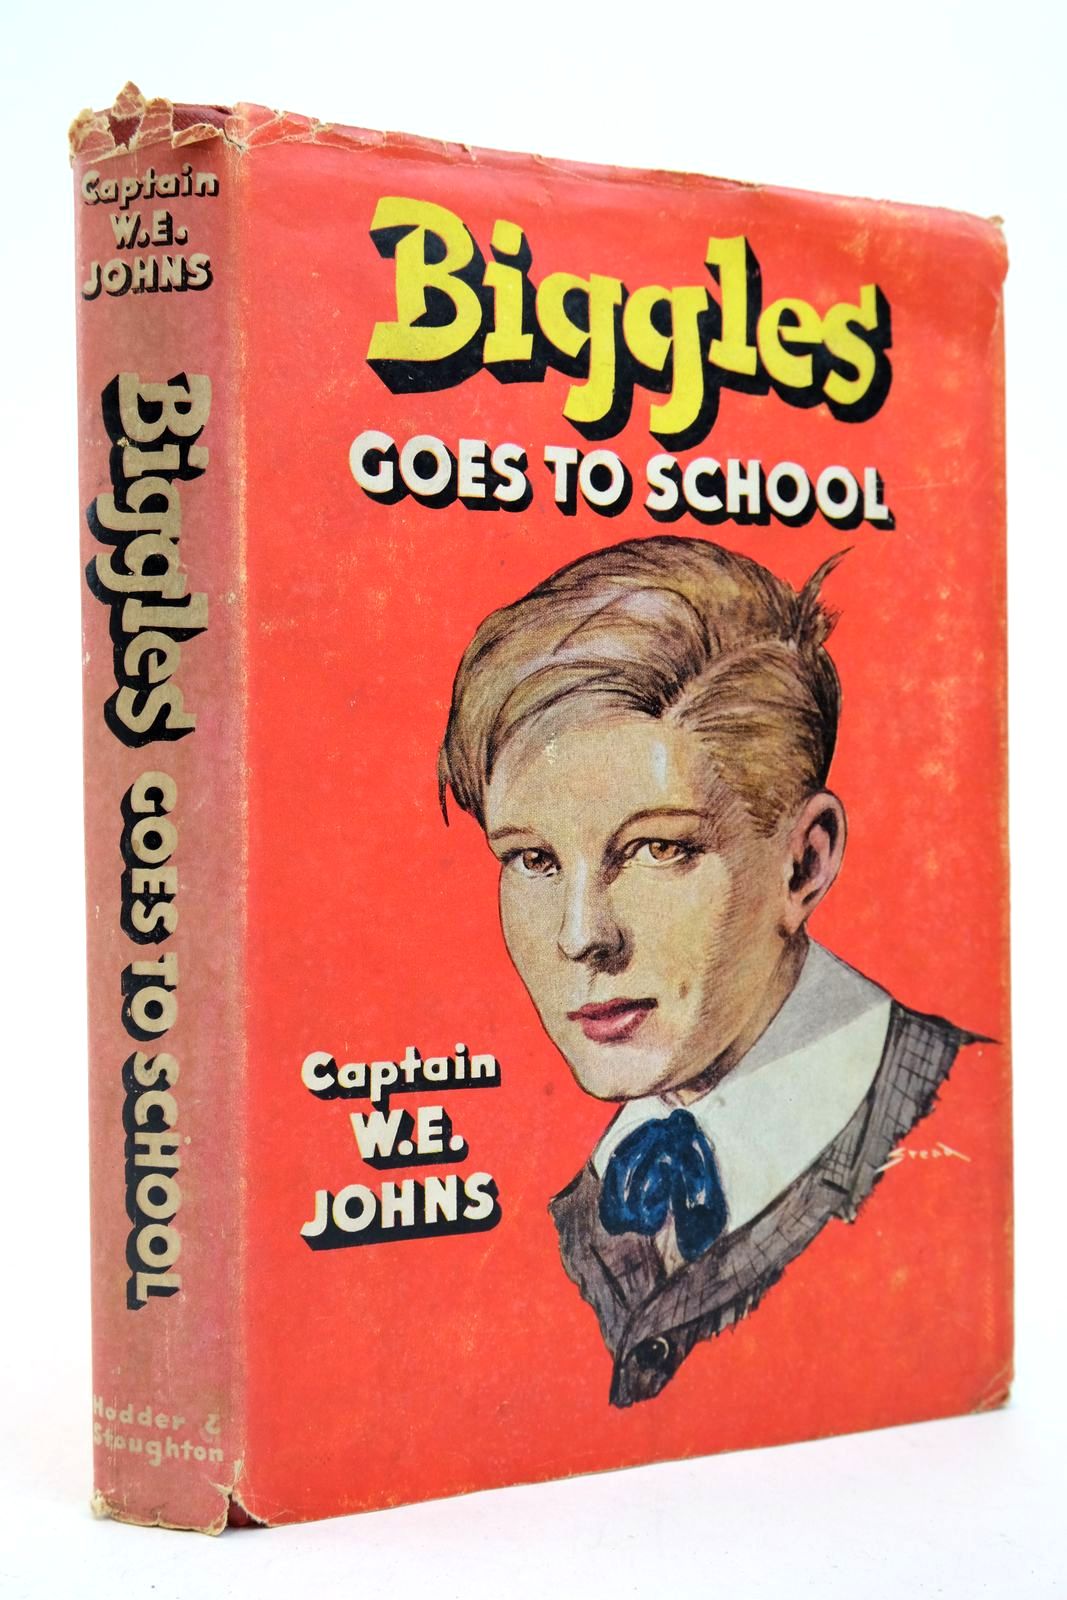 Photo of BIGGLES GOES TO SCHOOL written by Johns, W.E. illustrated by Stead,  published by Hodder & Stoughton (STOCK CODE: 2139727)  for sale by Stella & Rose's Books